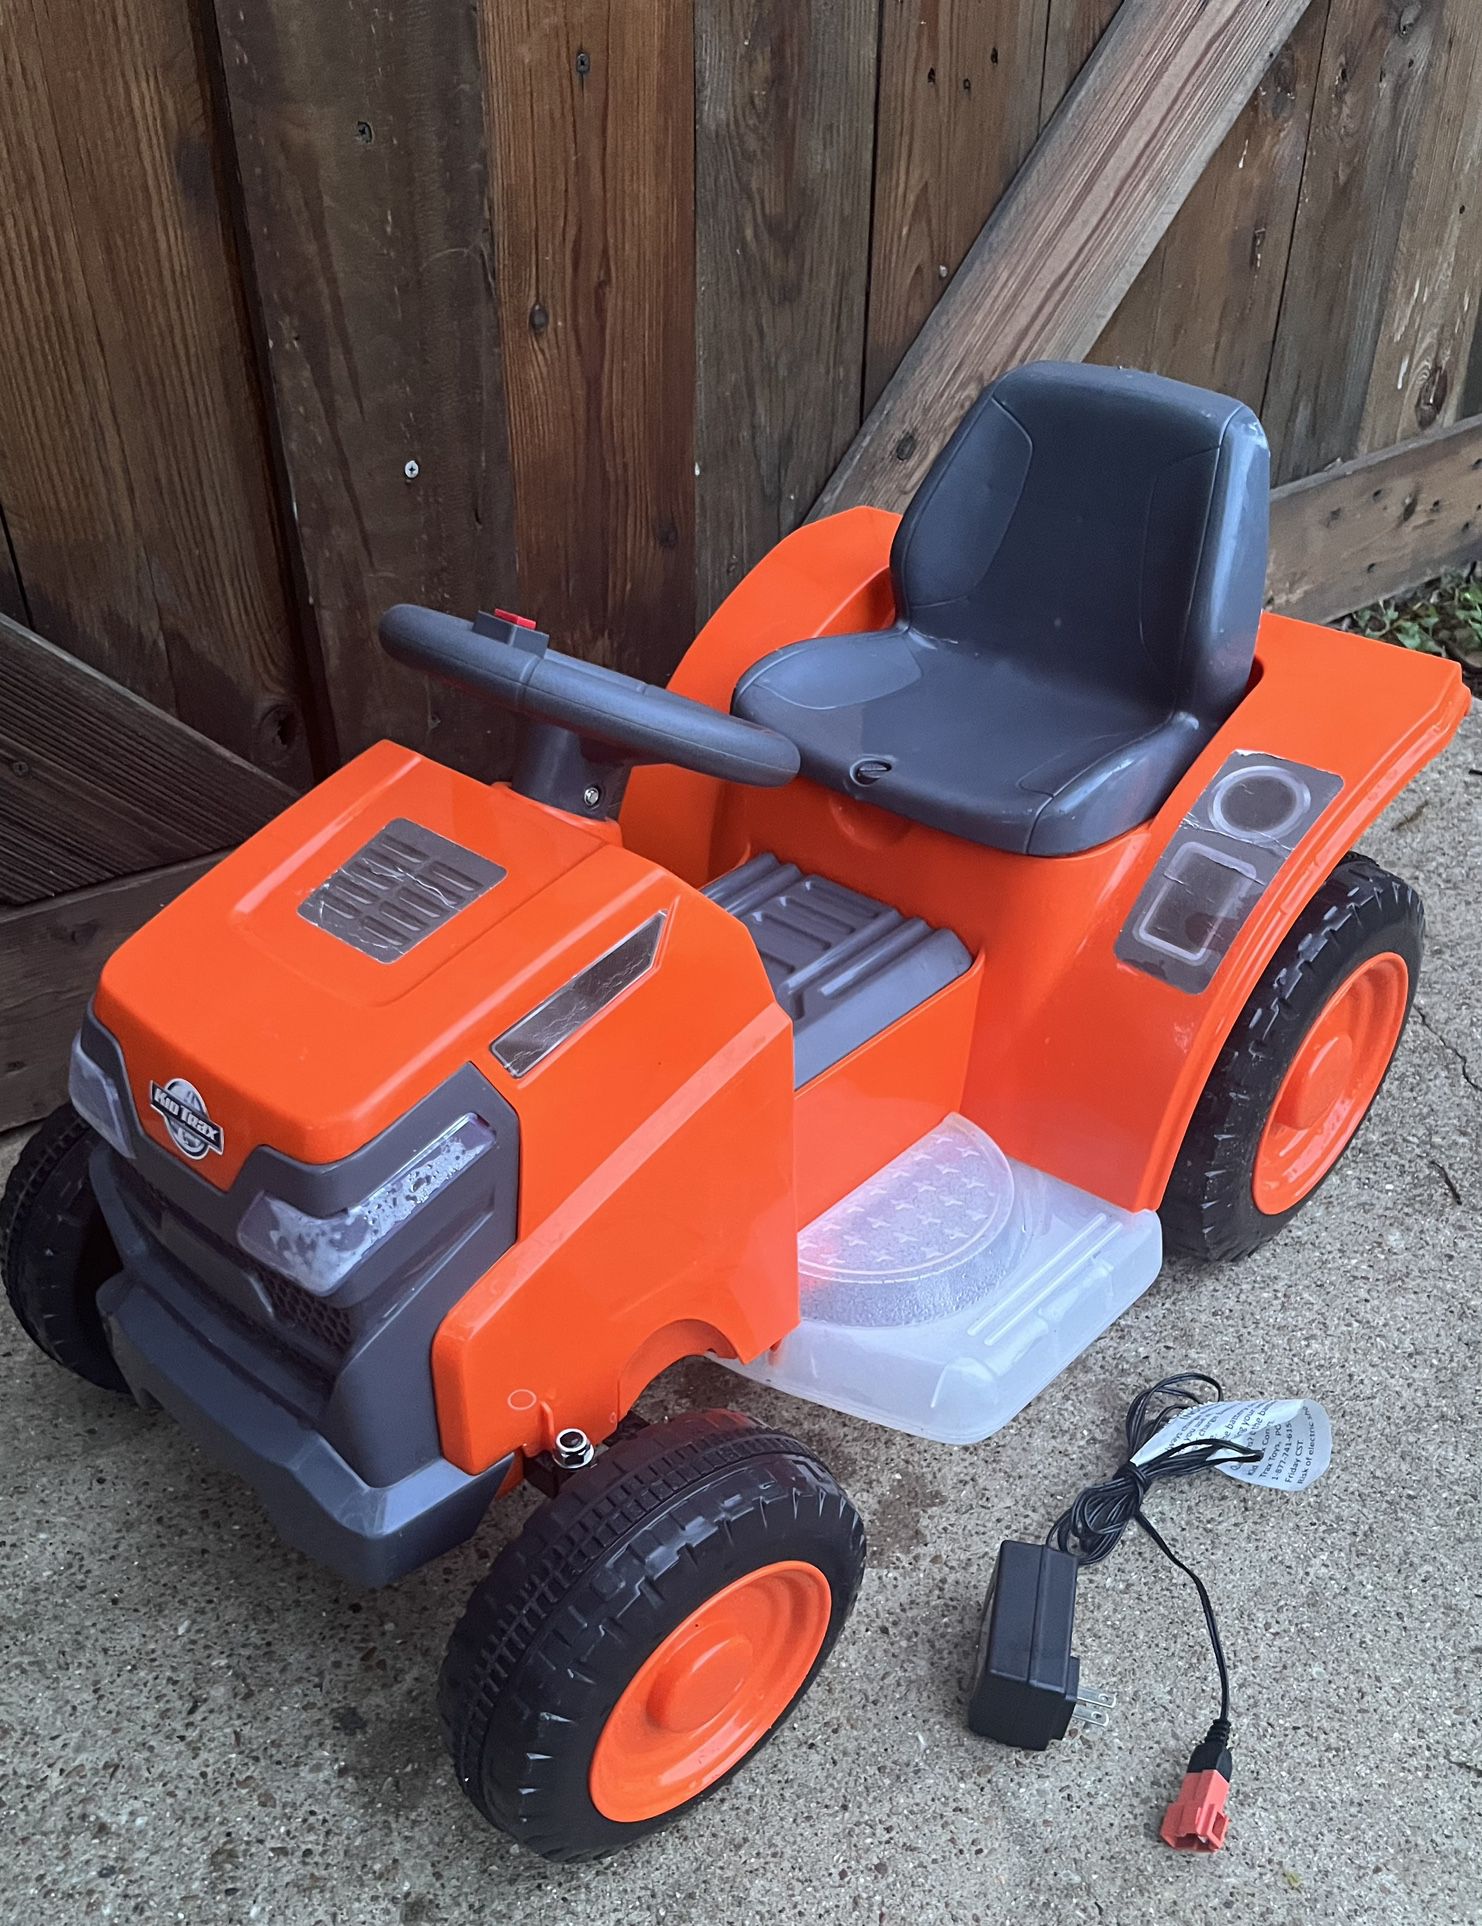 Mow & Go Lawn Mower Toy 6-Volt Ride-On Toy by Kid Trax